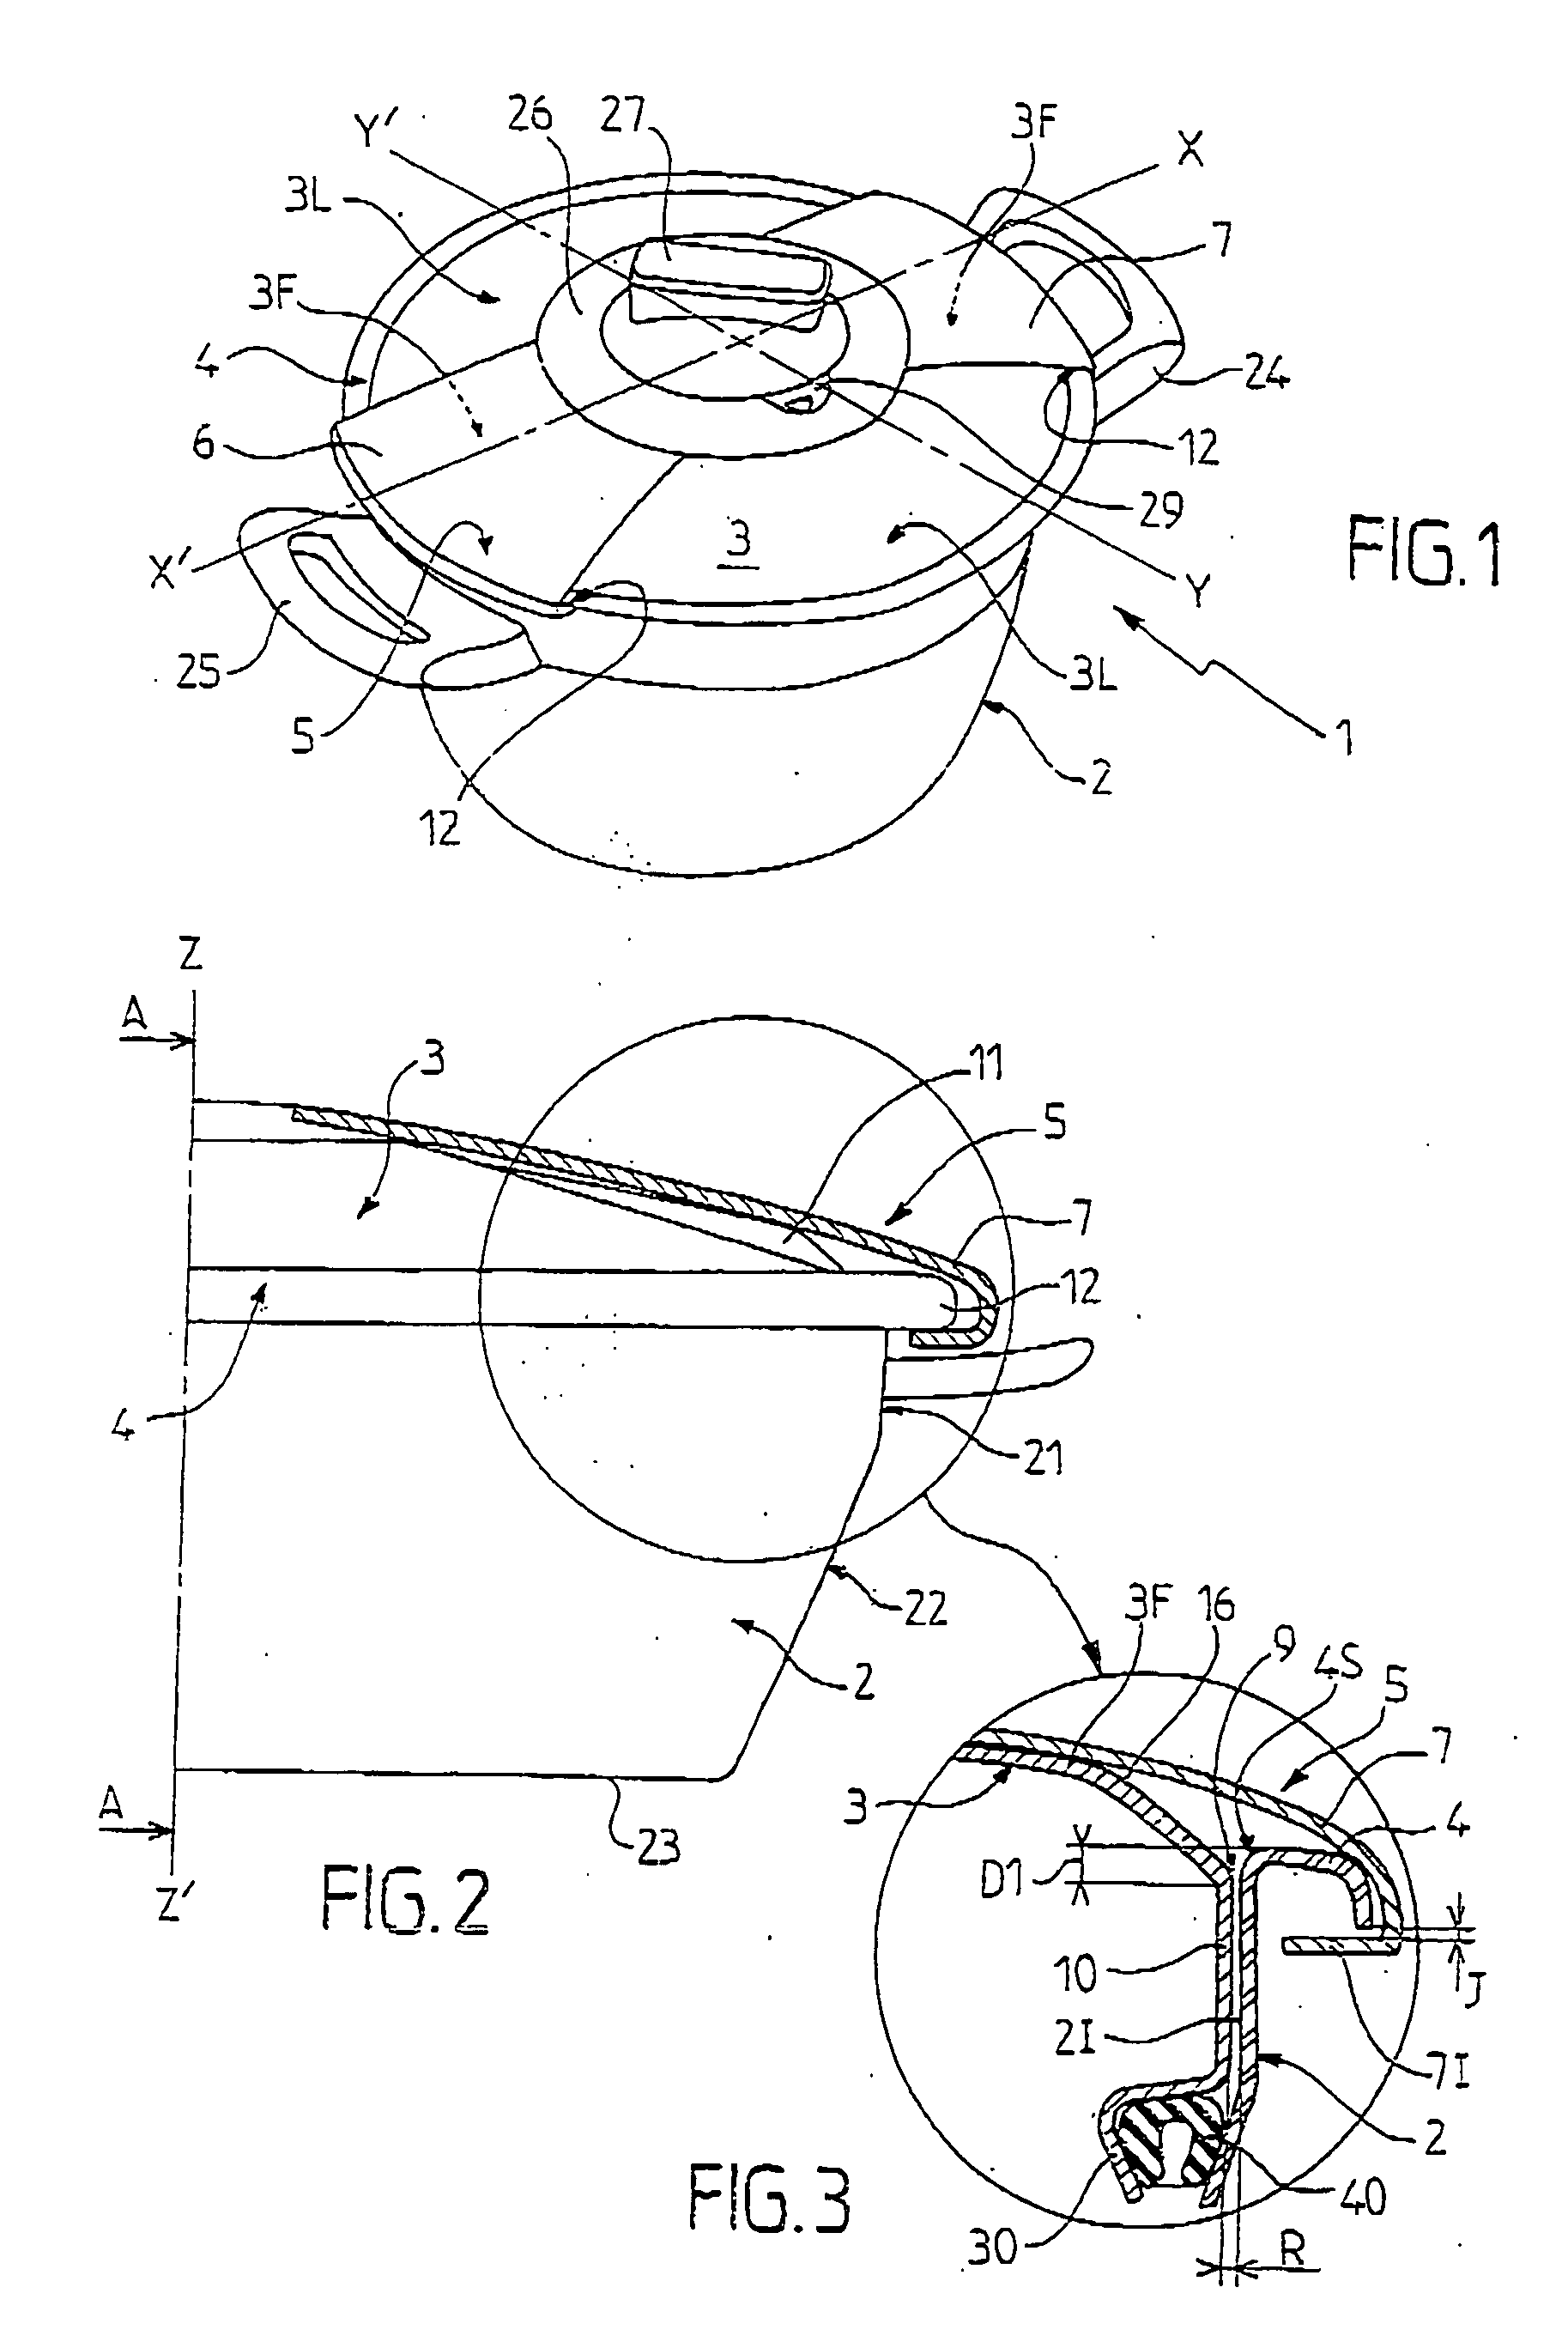 Pressure-Cooking Recipient Provided With A Lid Engageable By Controlled-Deformation And A Corresponding Lid